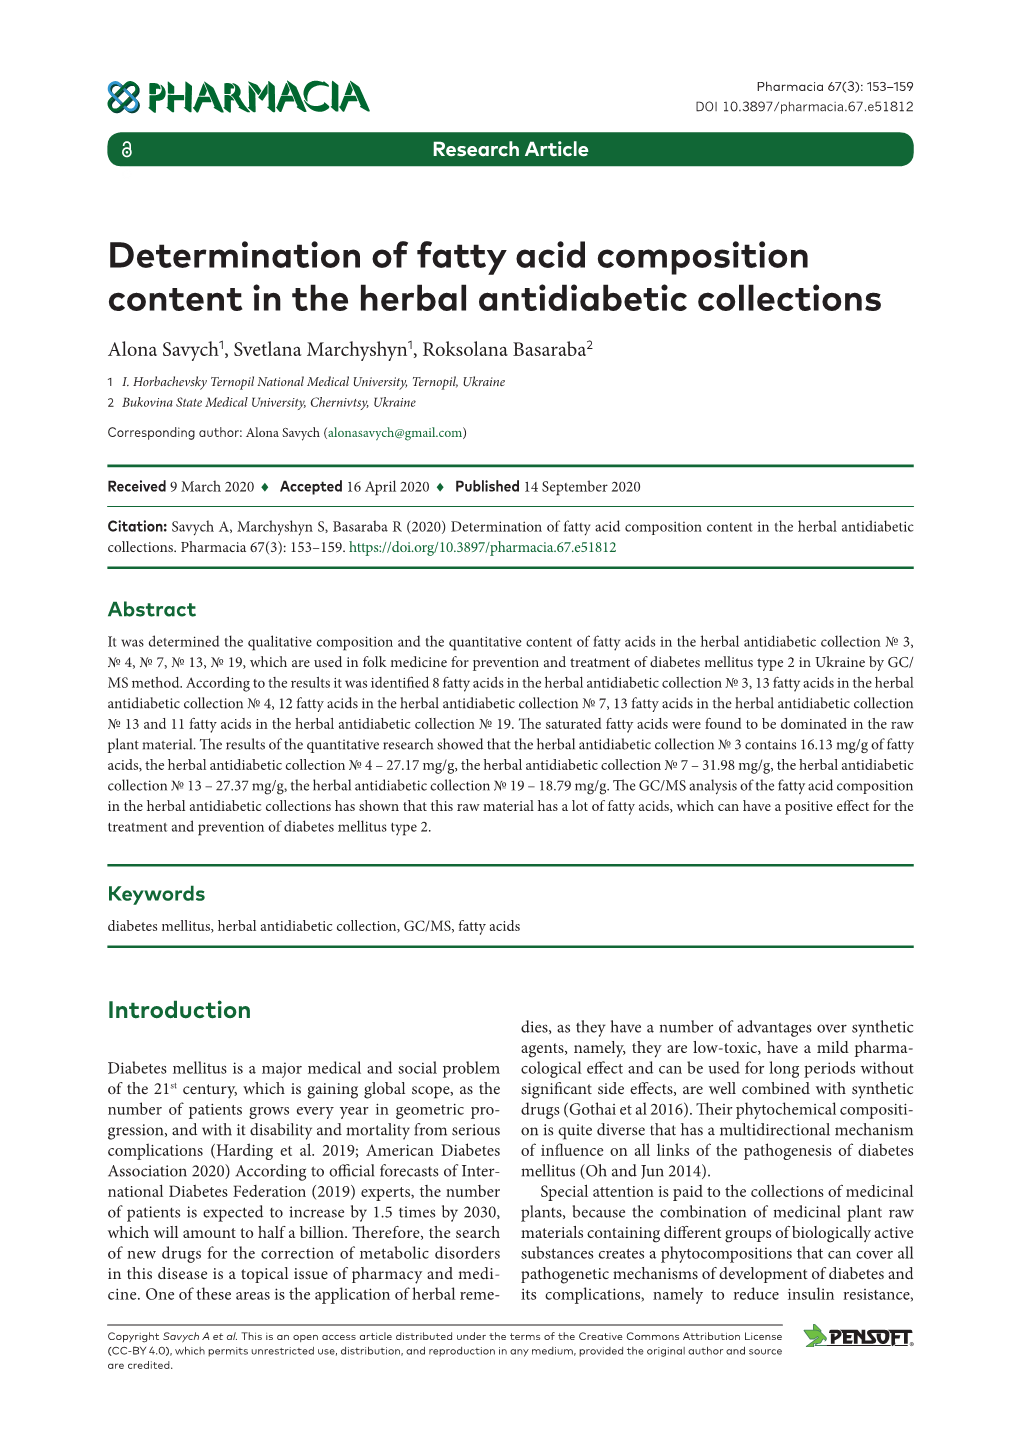 Determination of Fatty Acid Composition Content in the Herbal Antidiabetic Collections